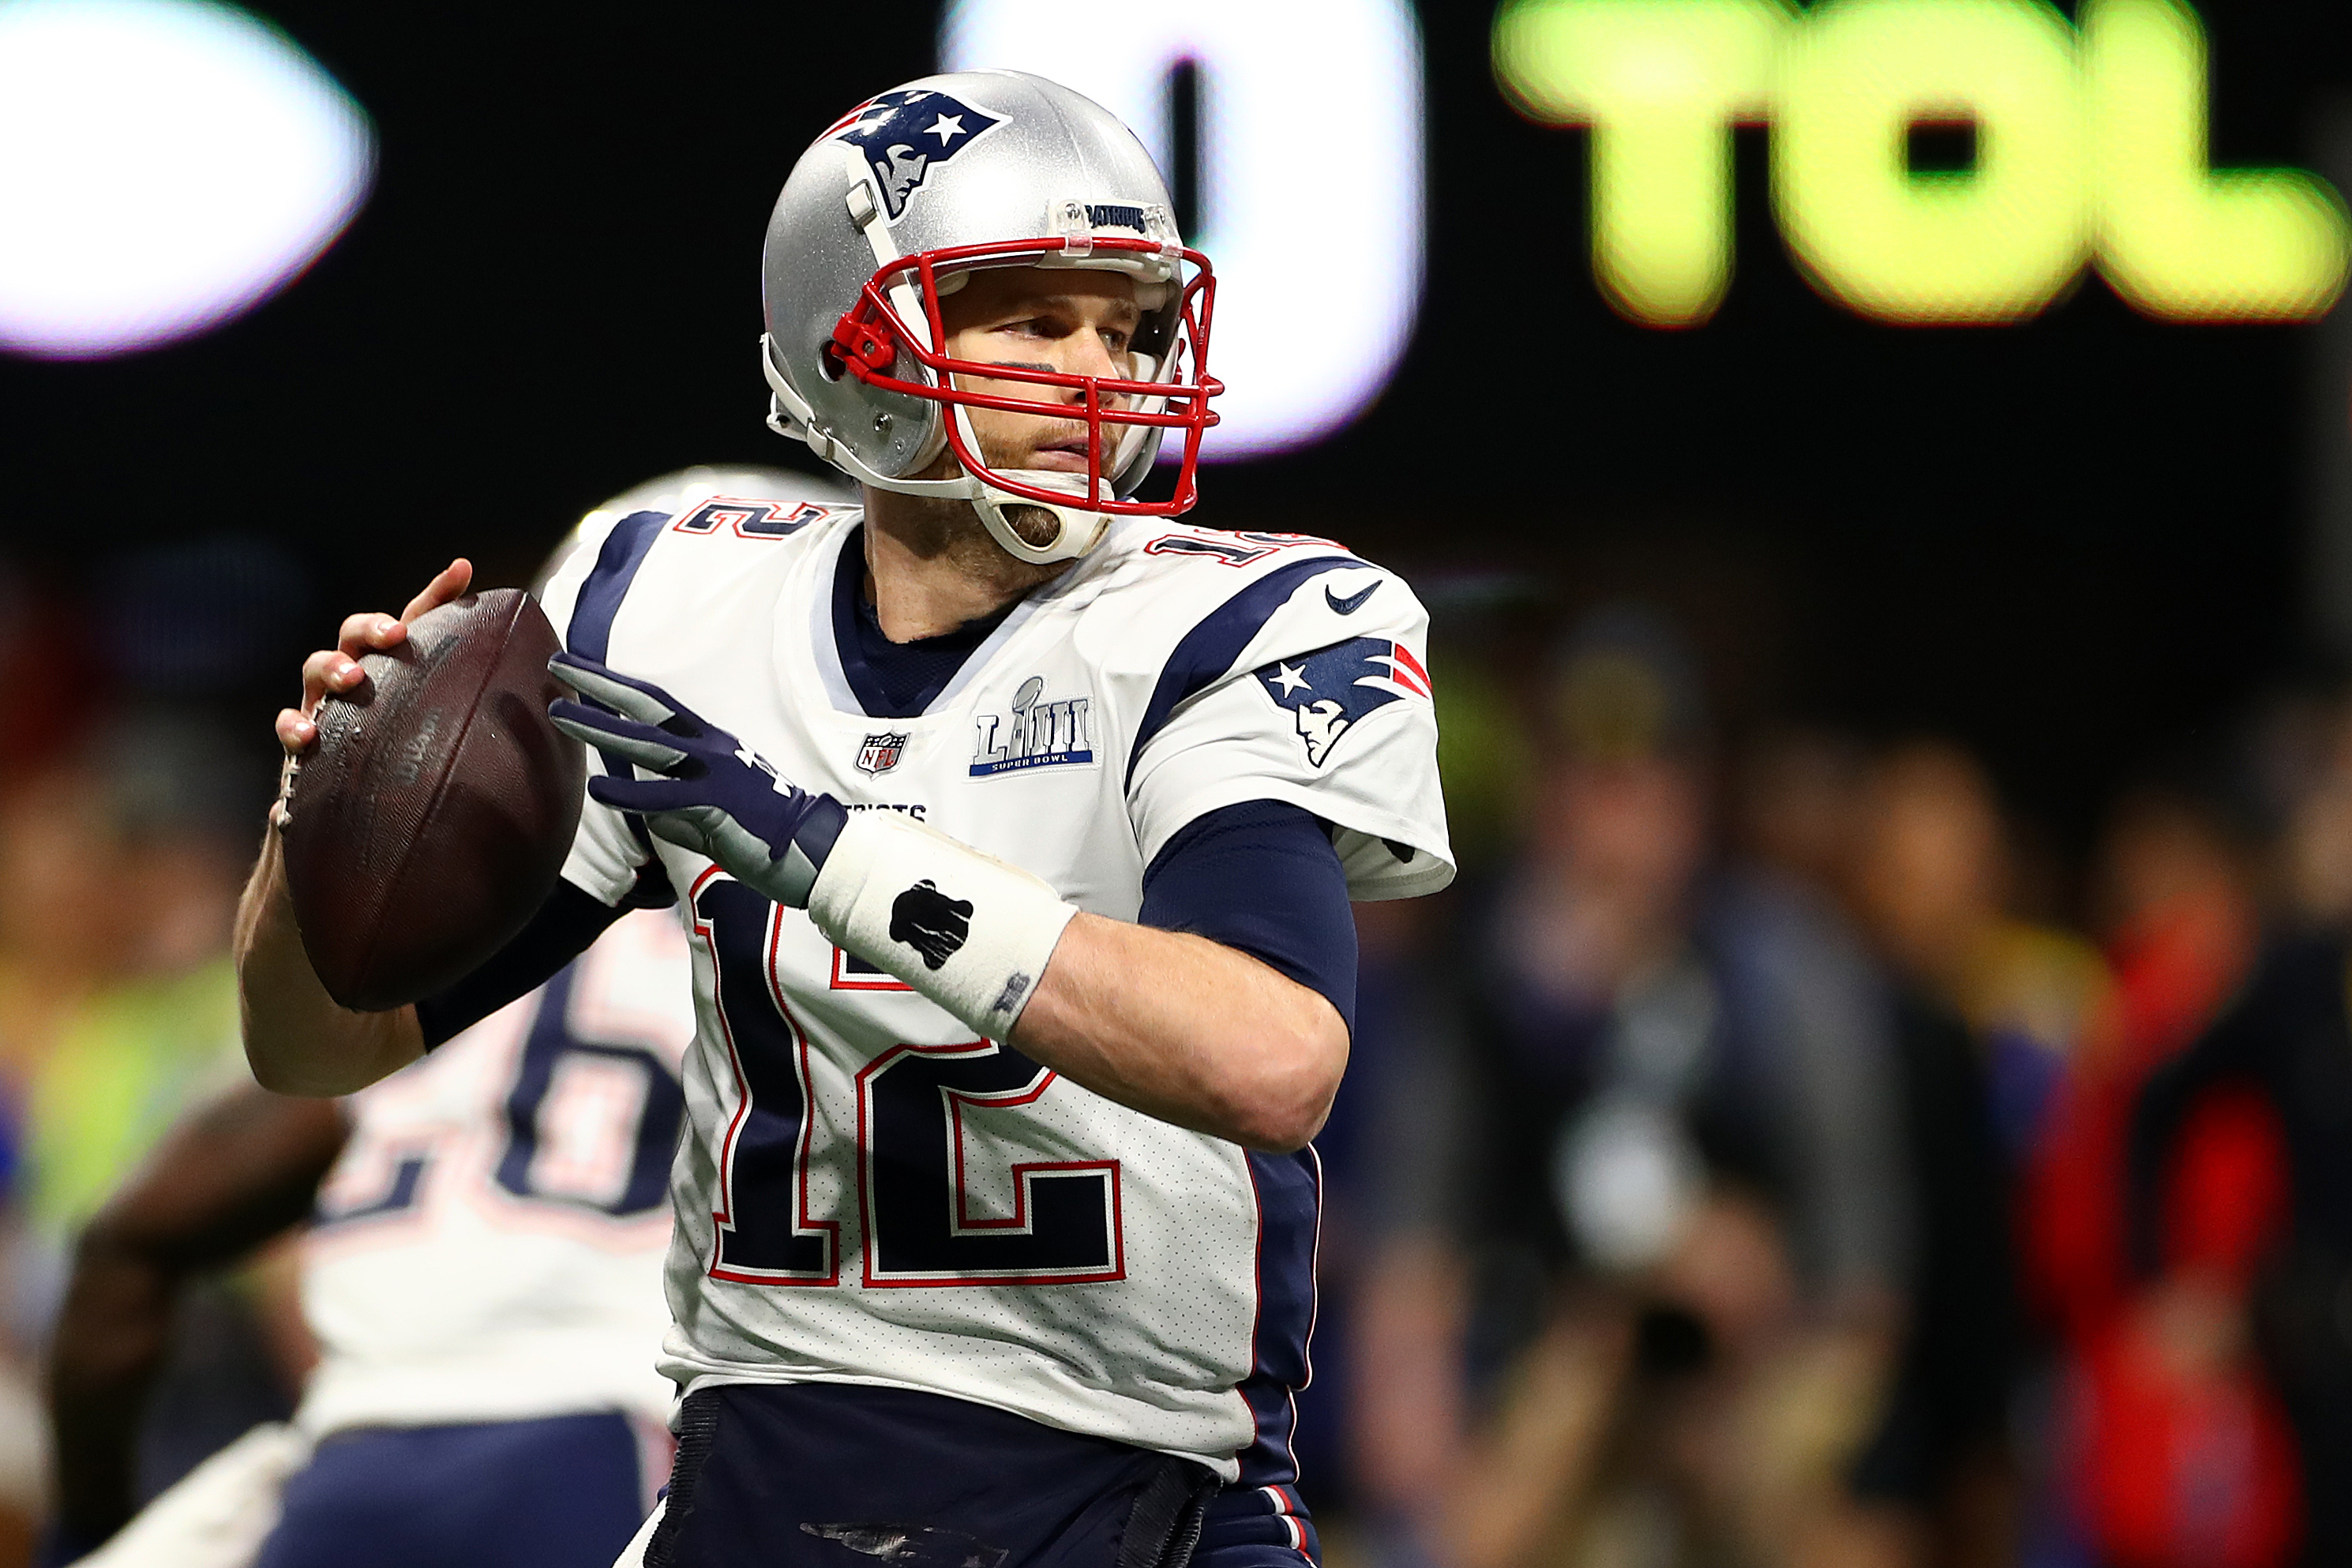 TPS on X: Before we give Brady the GOAT title, there is one last